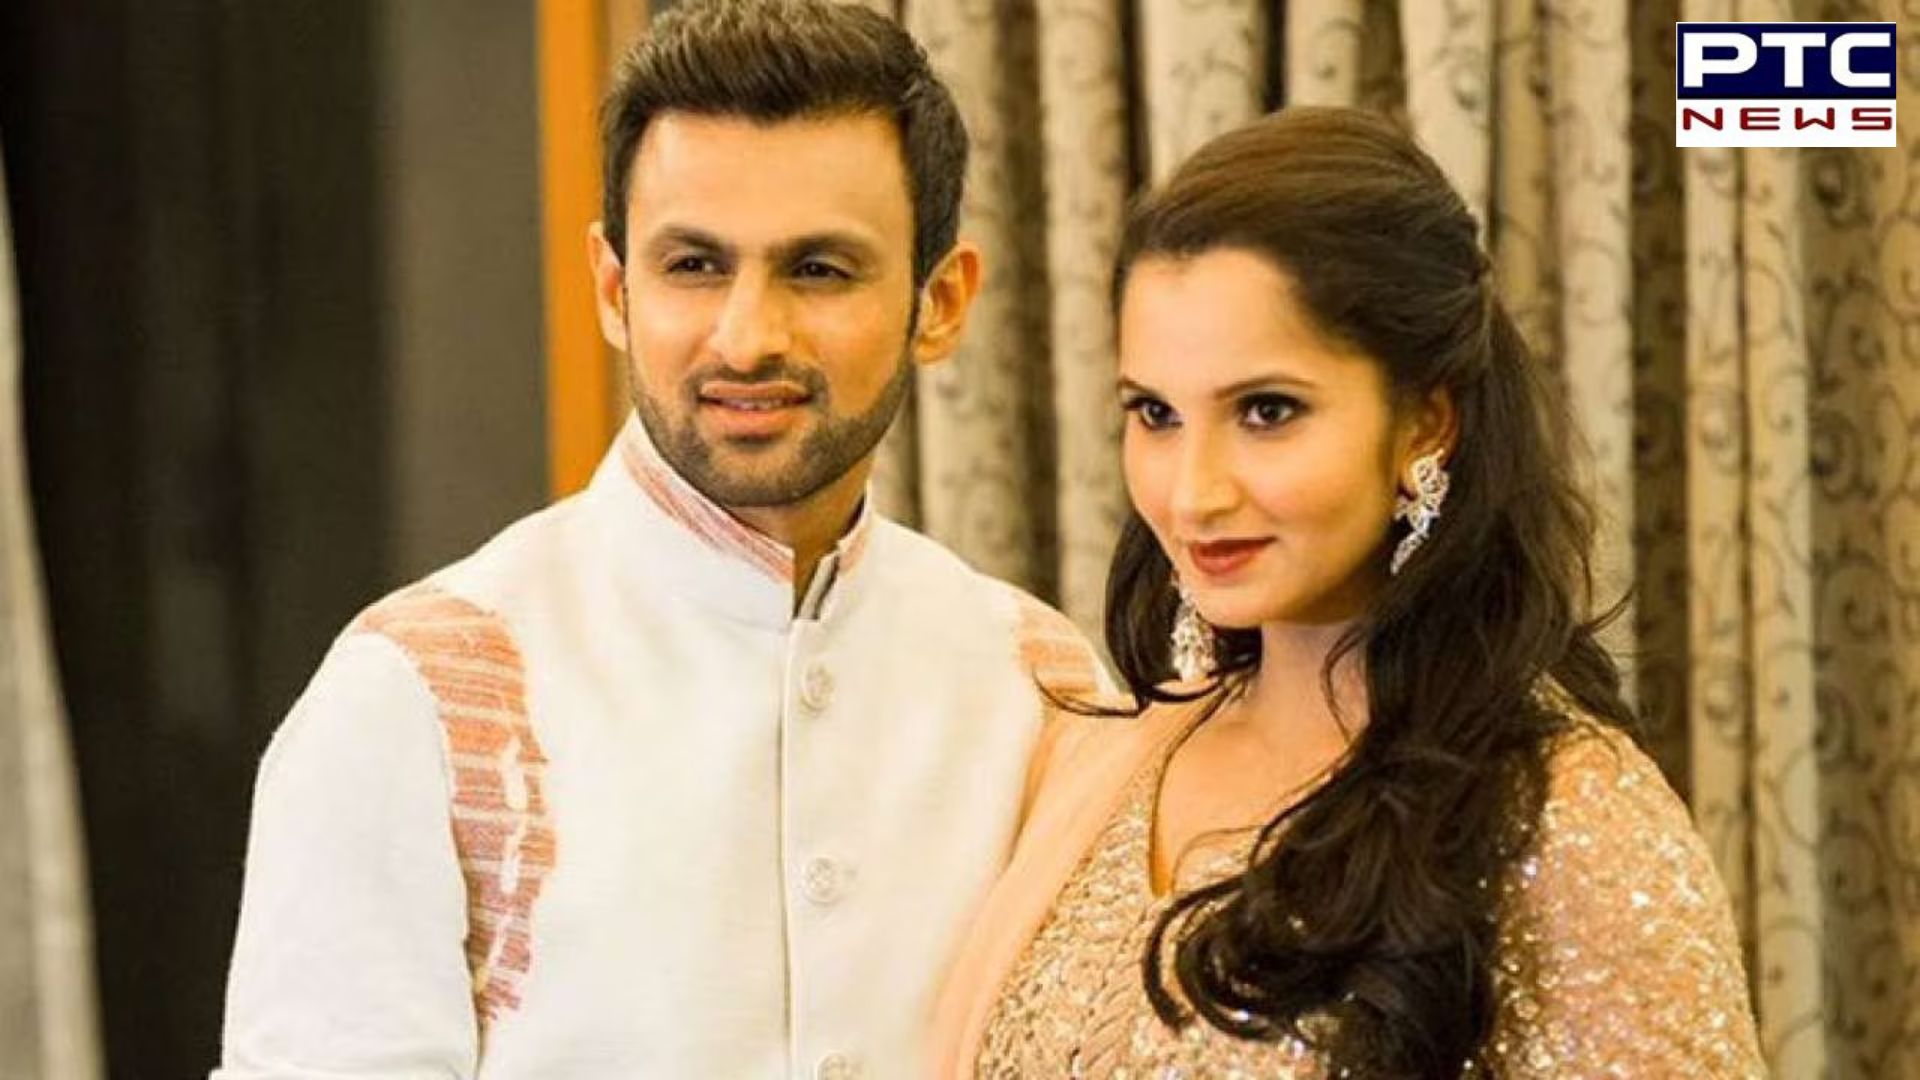 'Been divorced for months now, wishes Shoaib well': Sania Mirza's sister confirms separation